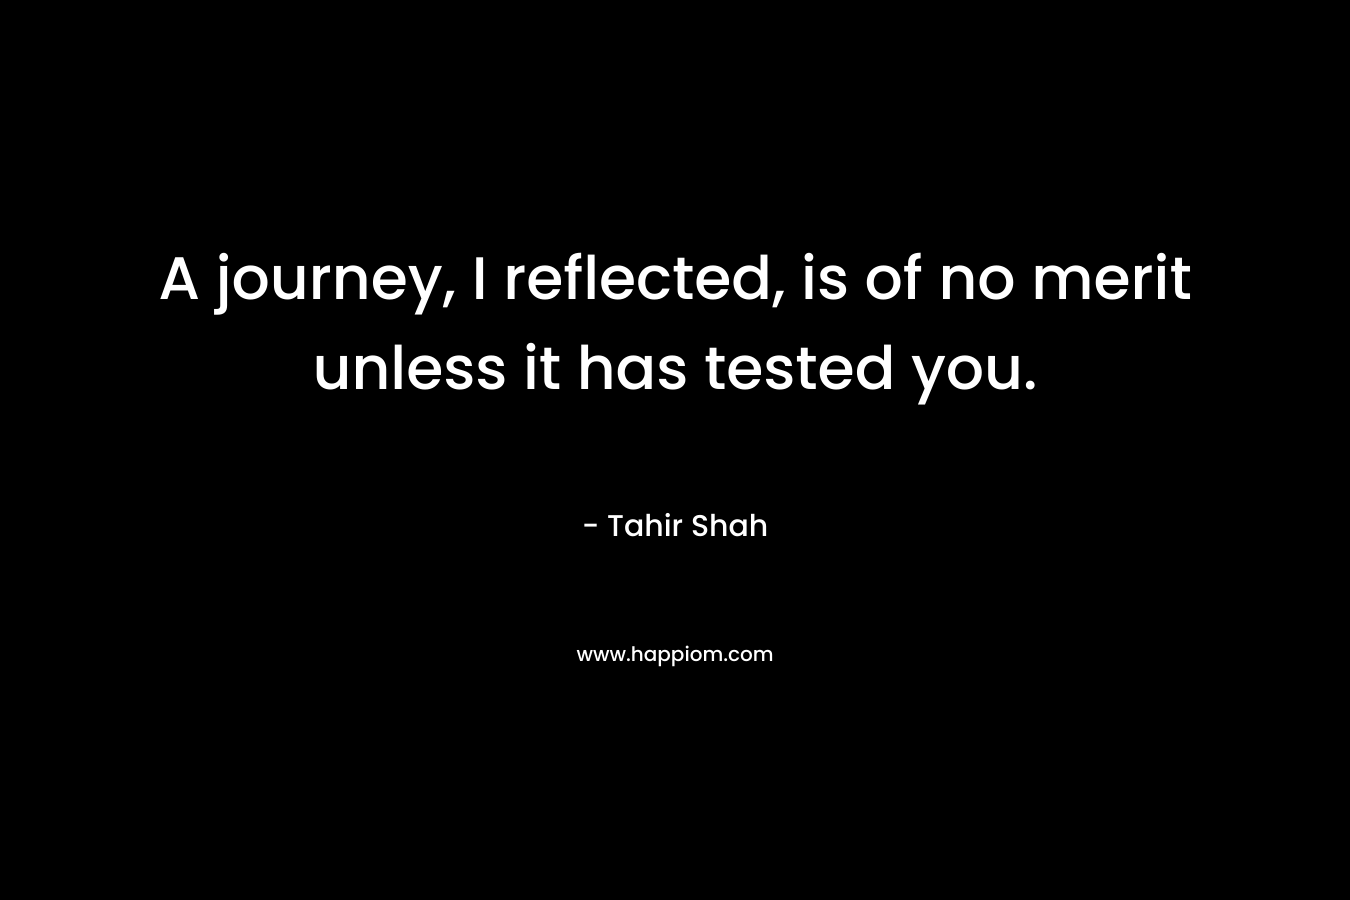 A journey, I reflected, is of no merit unless it has tested you. – Tahir Shah